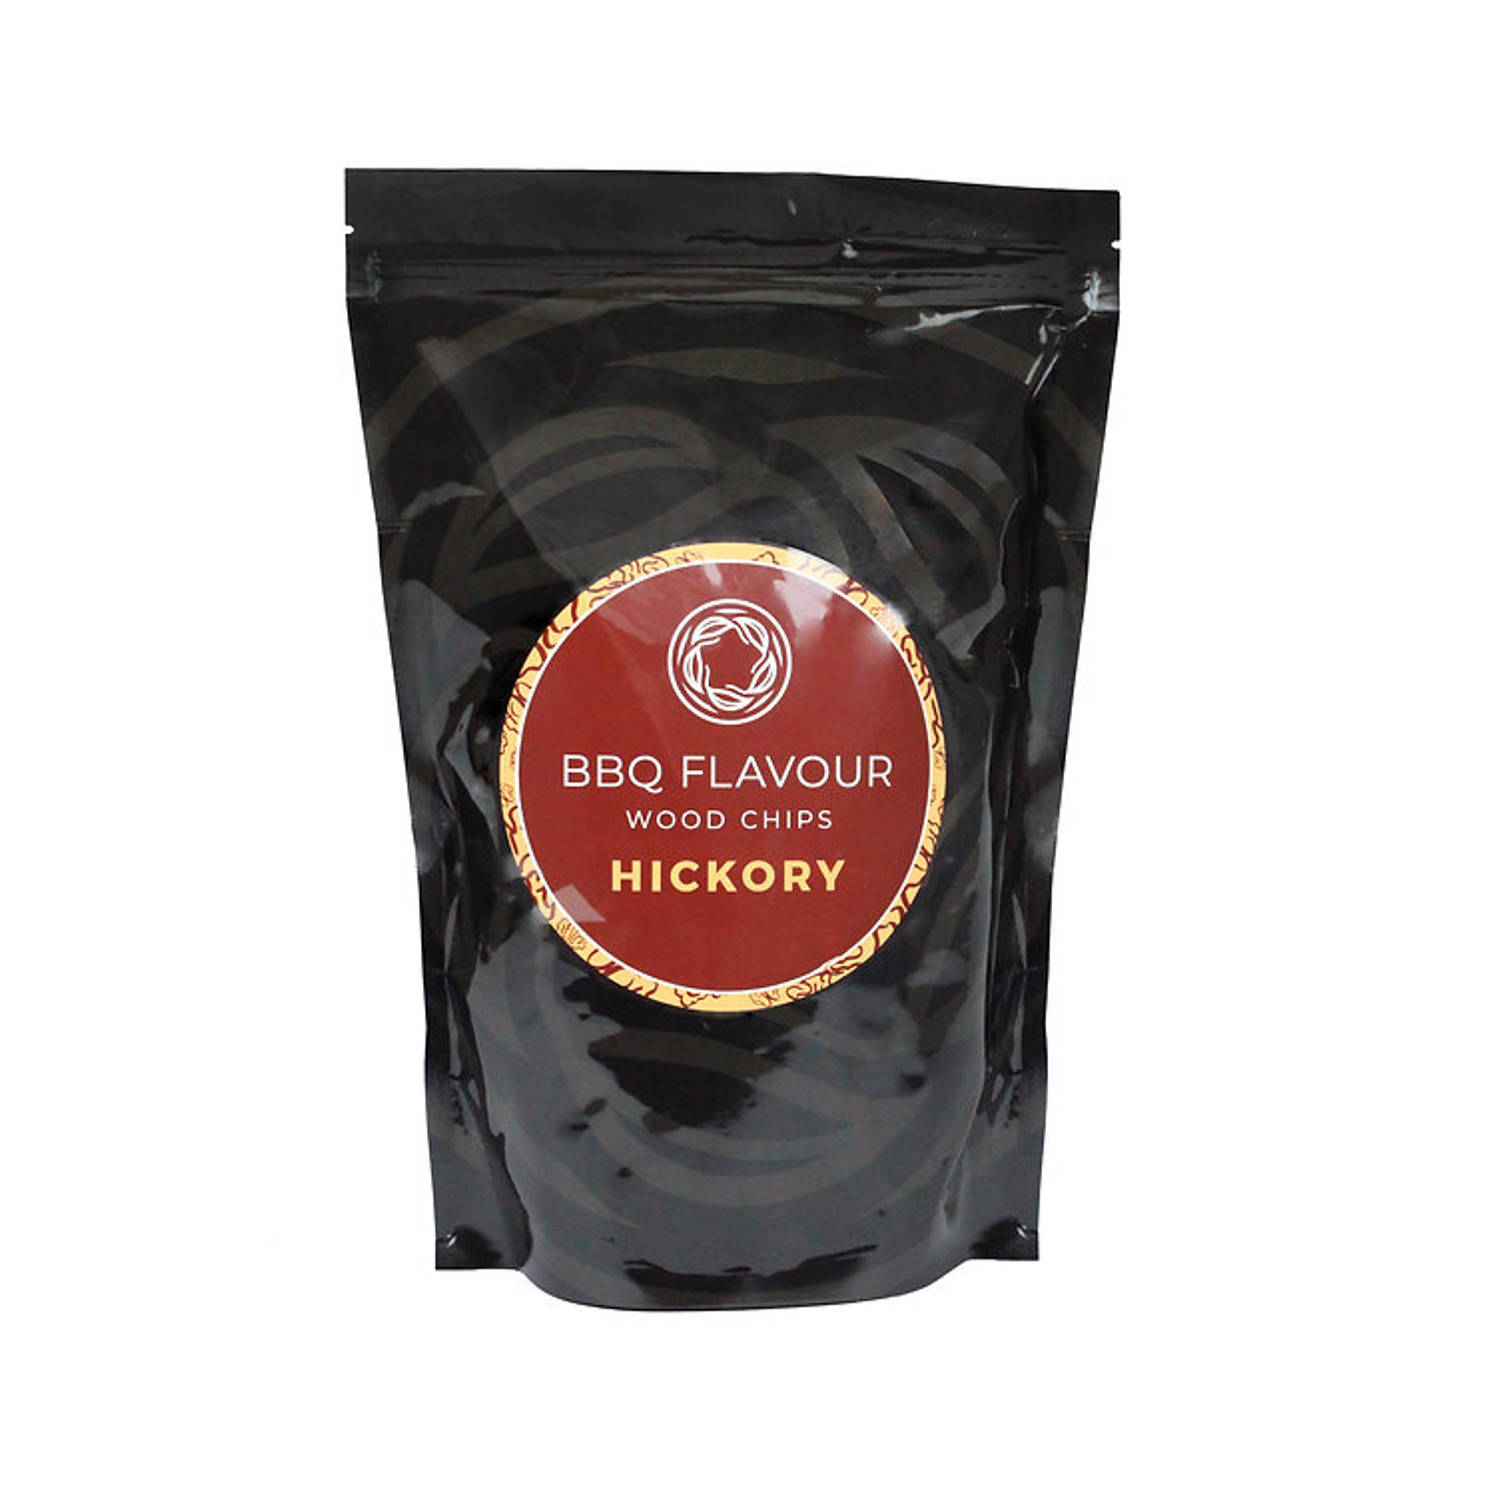 BBQ Flavour Rookhout Hickory Smoke wood Hickory Hickoryhout BBQ Rookhout chips Kamado Tafelgrill Gas BBQ